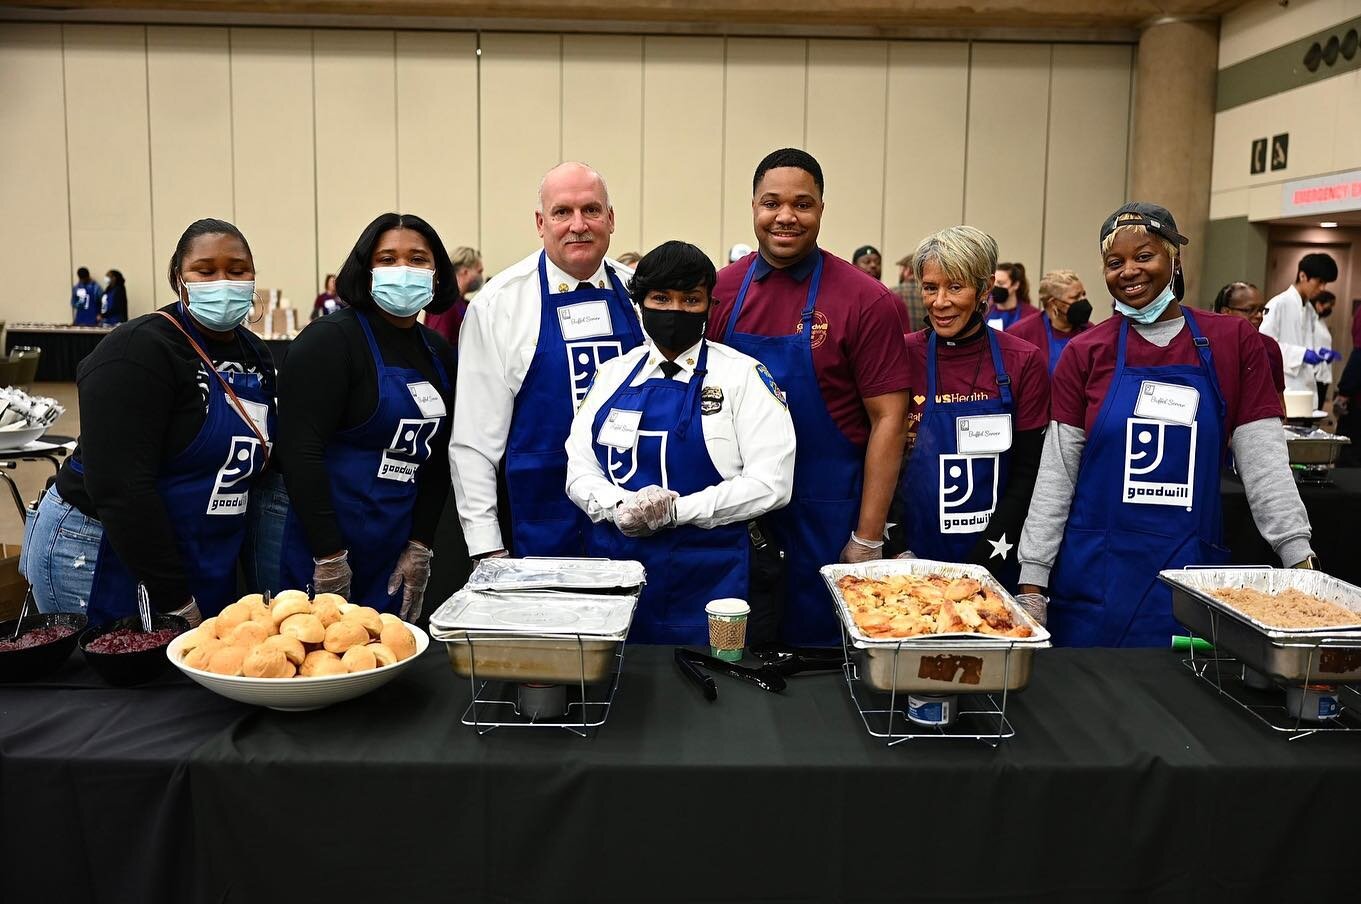 Lent a helping hand this morning at Goodwill's 65th Annual Thanksgiving Dinner &amp; Resource Fair.